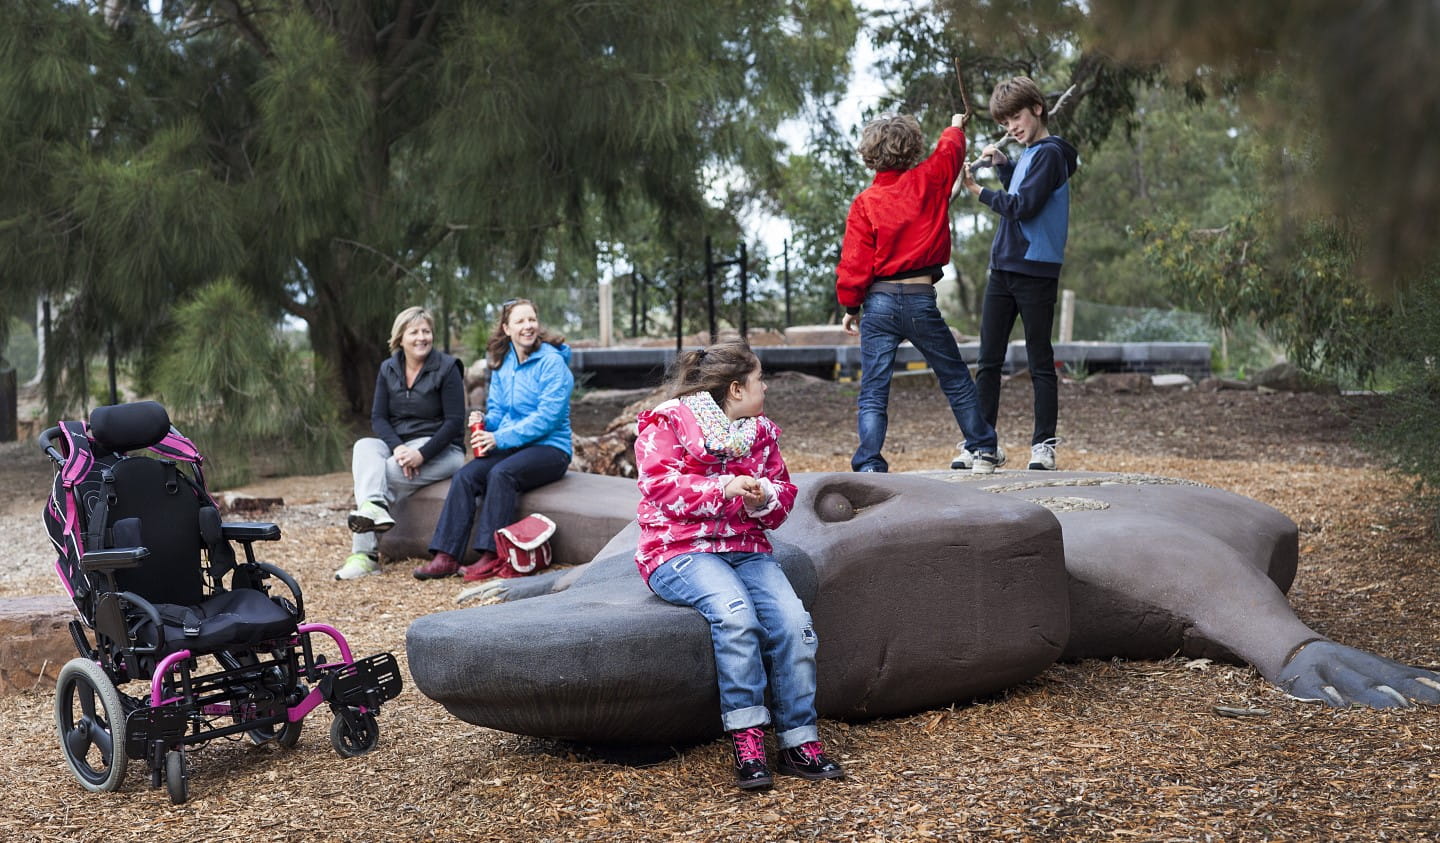 Children of all abilities are encouraged to play in nature-based playgrounds.